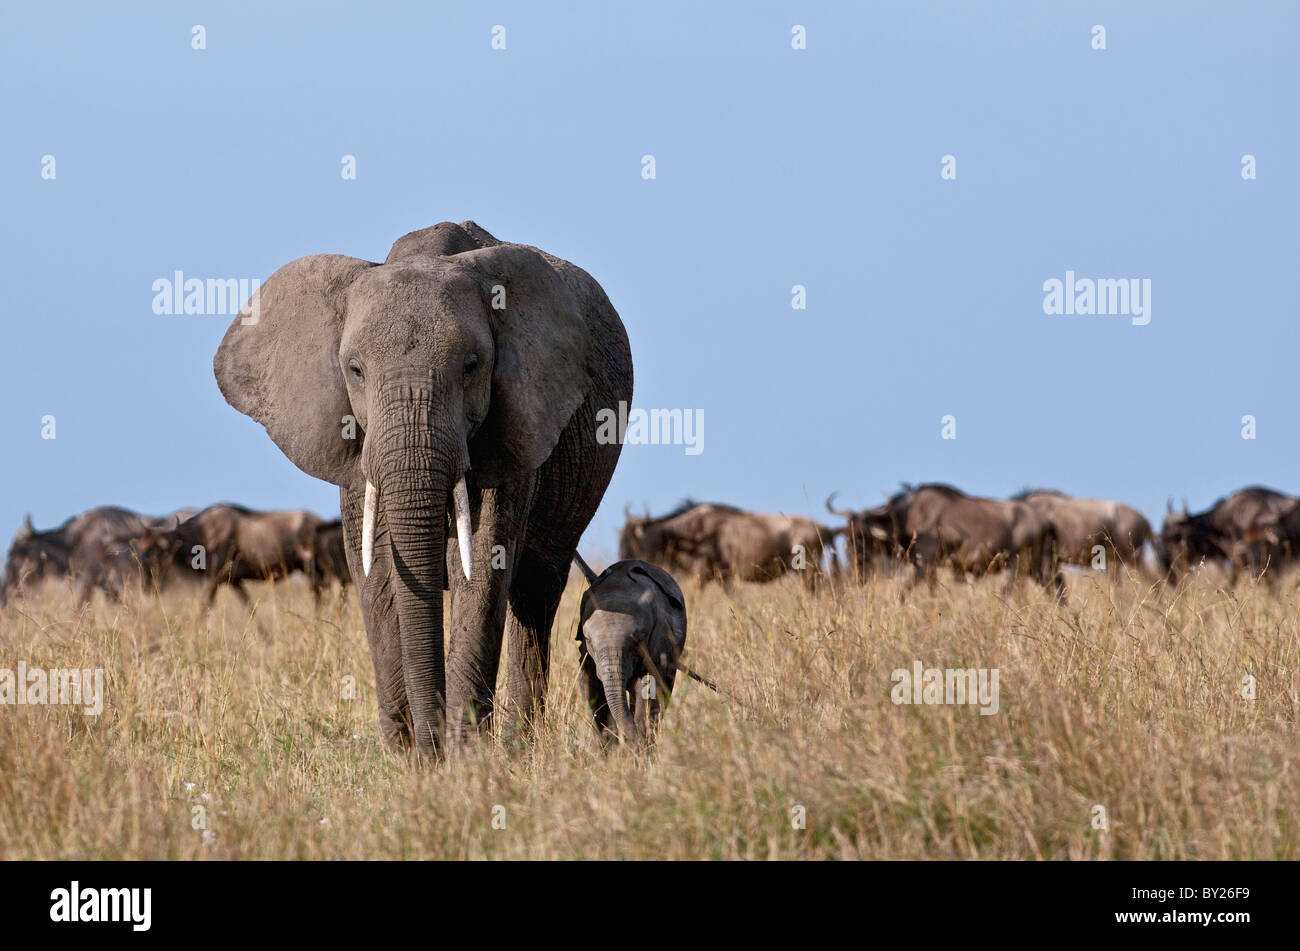 An elephant and her very small calf with a herd of wildebeest in the background. Stock Photo